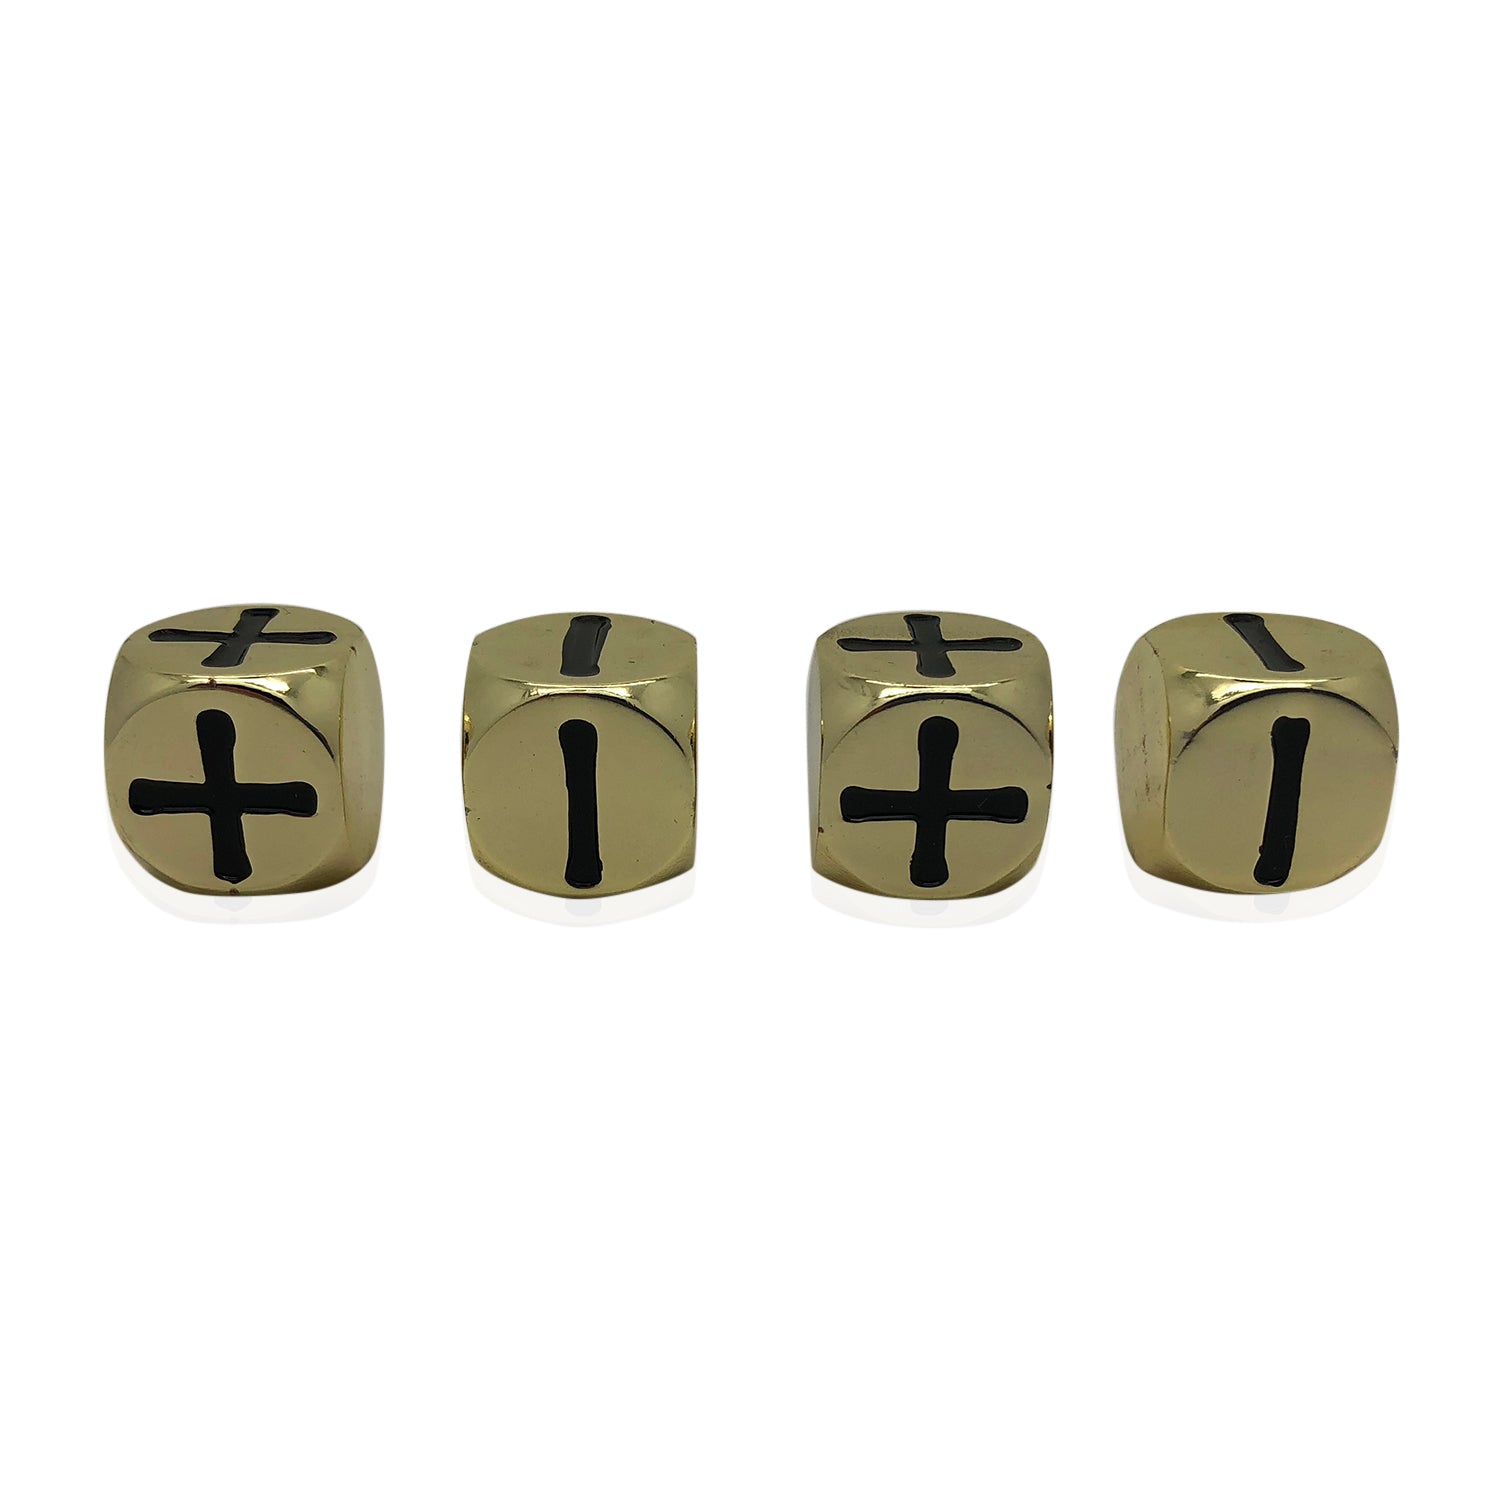 Fate Dice – Dead Man's Gold Pack of 4 Metal Dice - NOR 00711